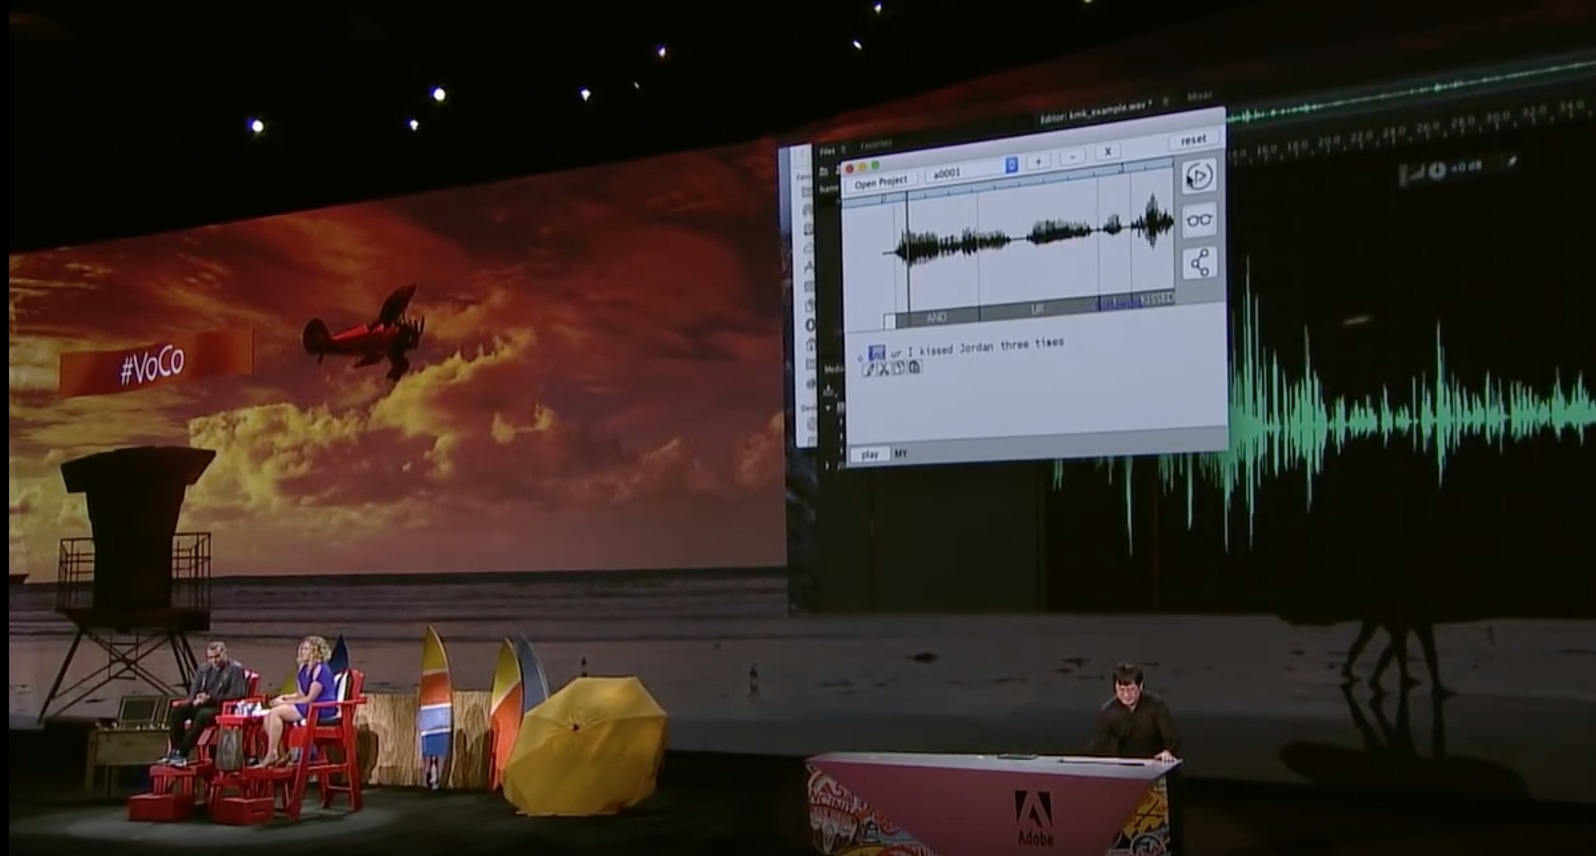 The stage at Adobe Max's Sneak Peaks event where Project VoCo debuted.